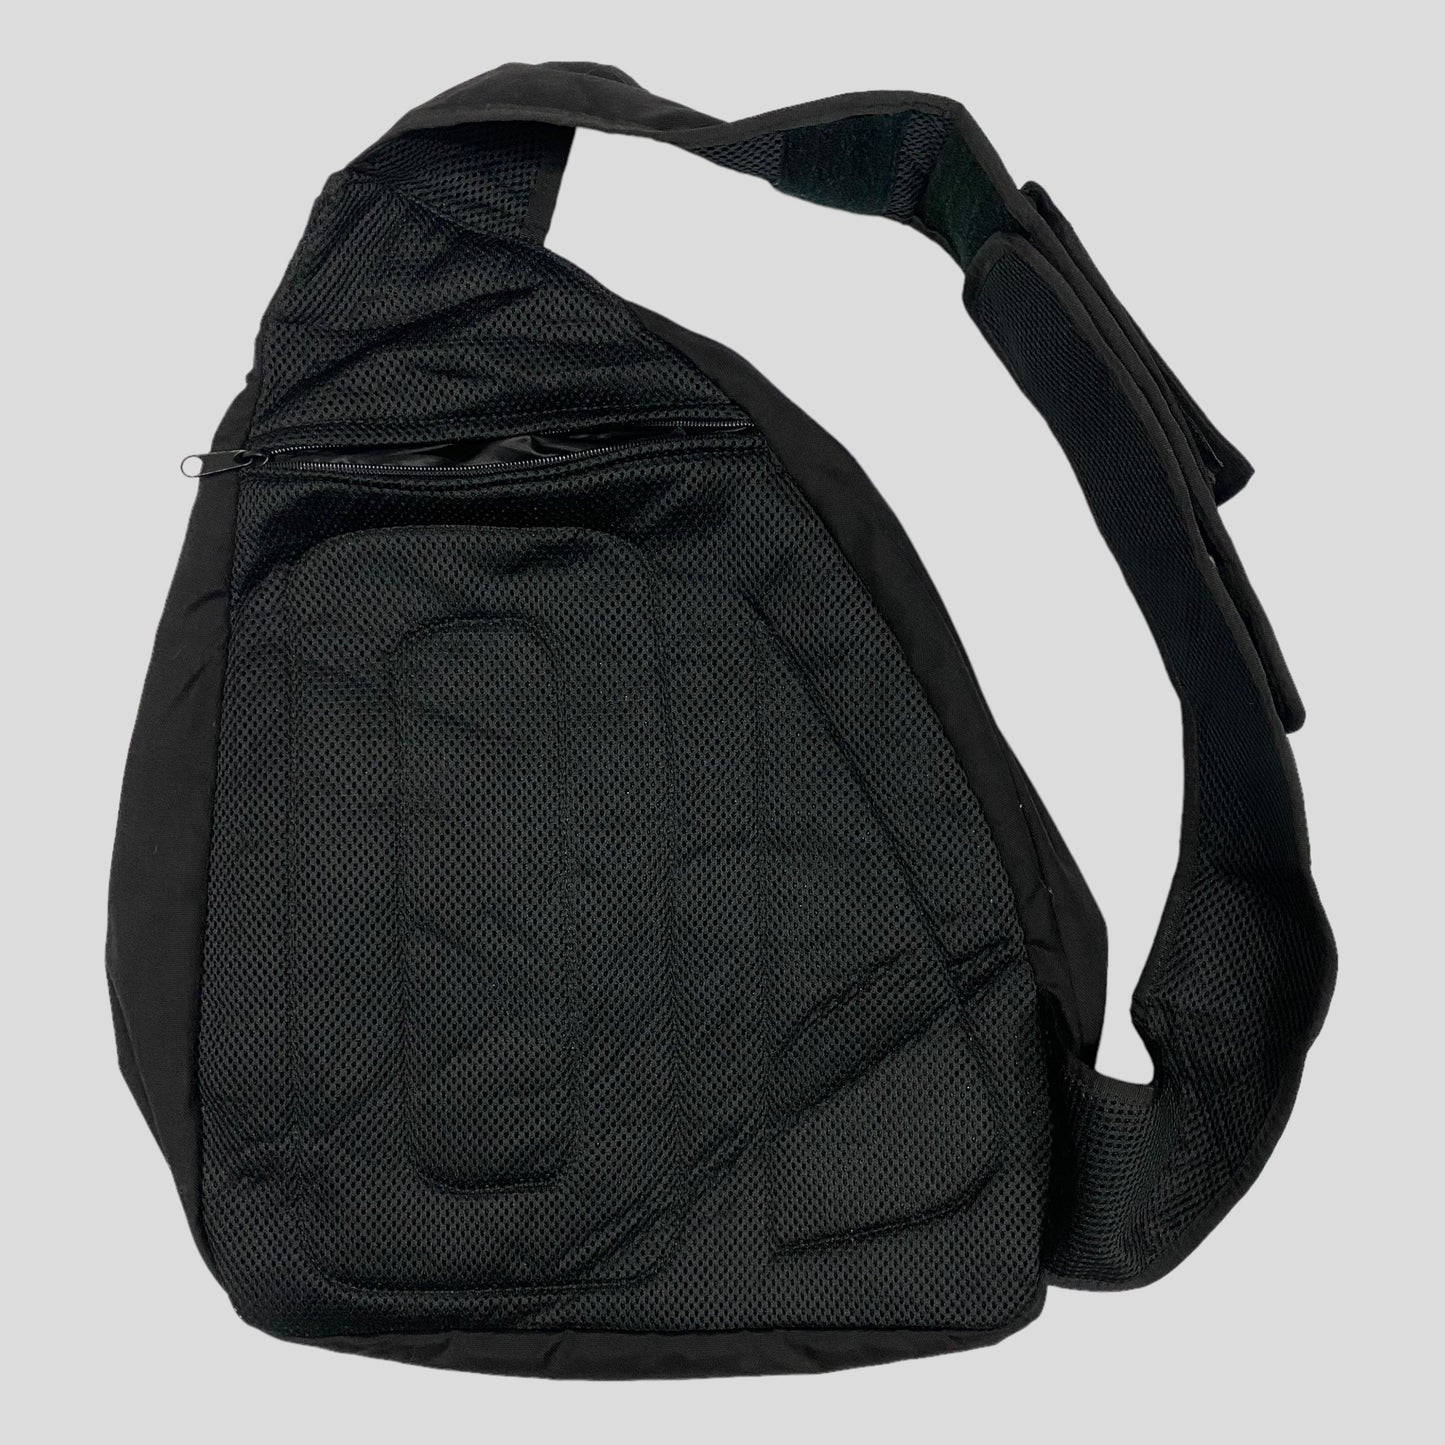 IS Island 00’s Tactical Slingbag - Black - Known Source